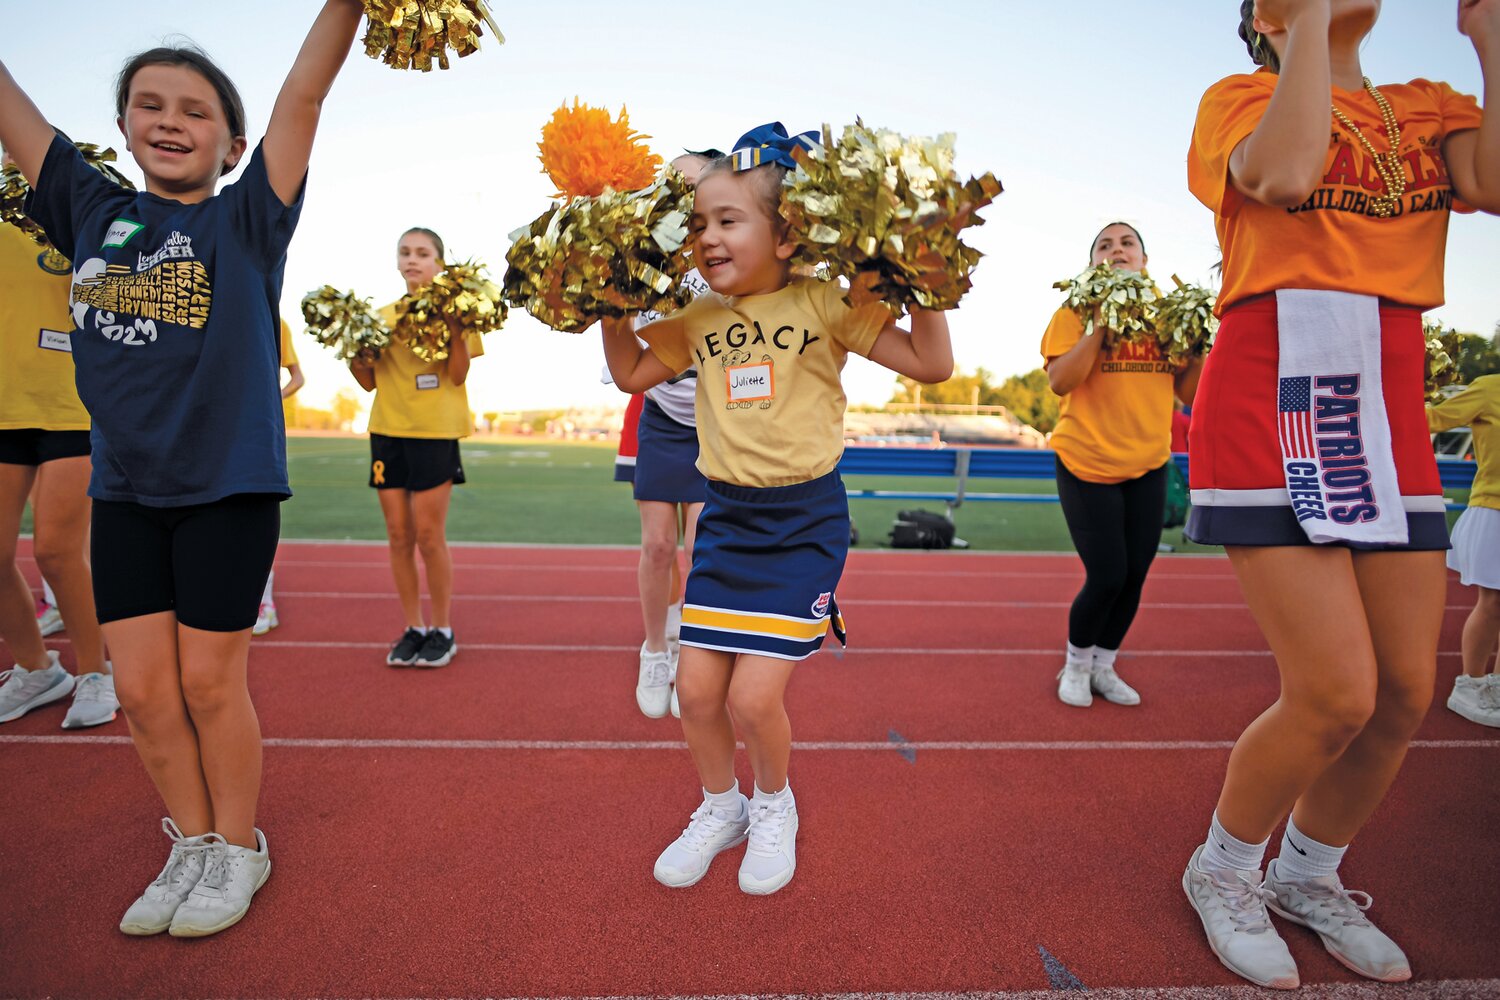 Five-year-old cheerleader Juliette Sailor of Our lady of Mount Carmel during pregame activities with the Central Bucks East cheerleaders.